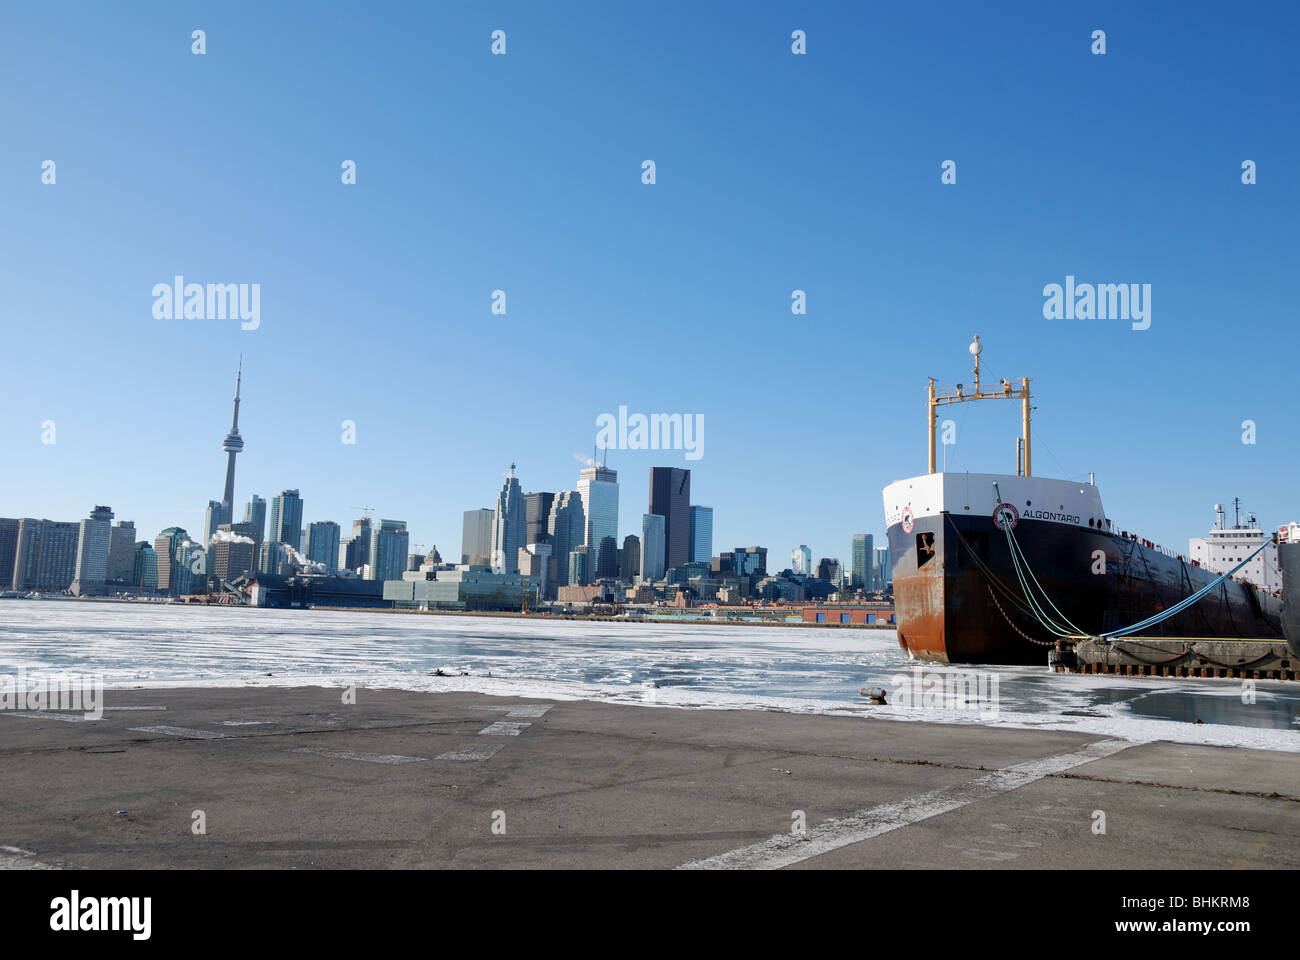 A view of a great lakes freighter moored for the winter in Toronto harbour's shipping port Stock Photo